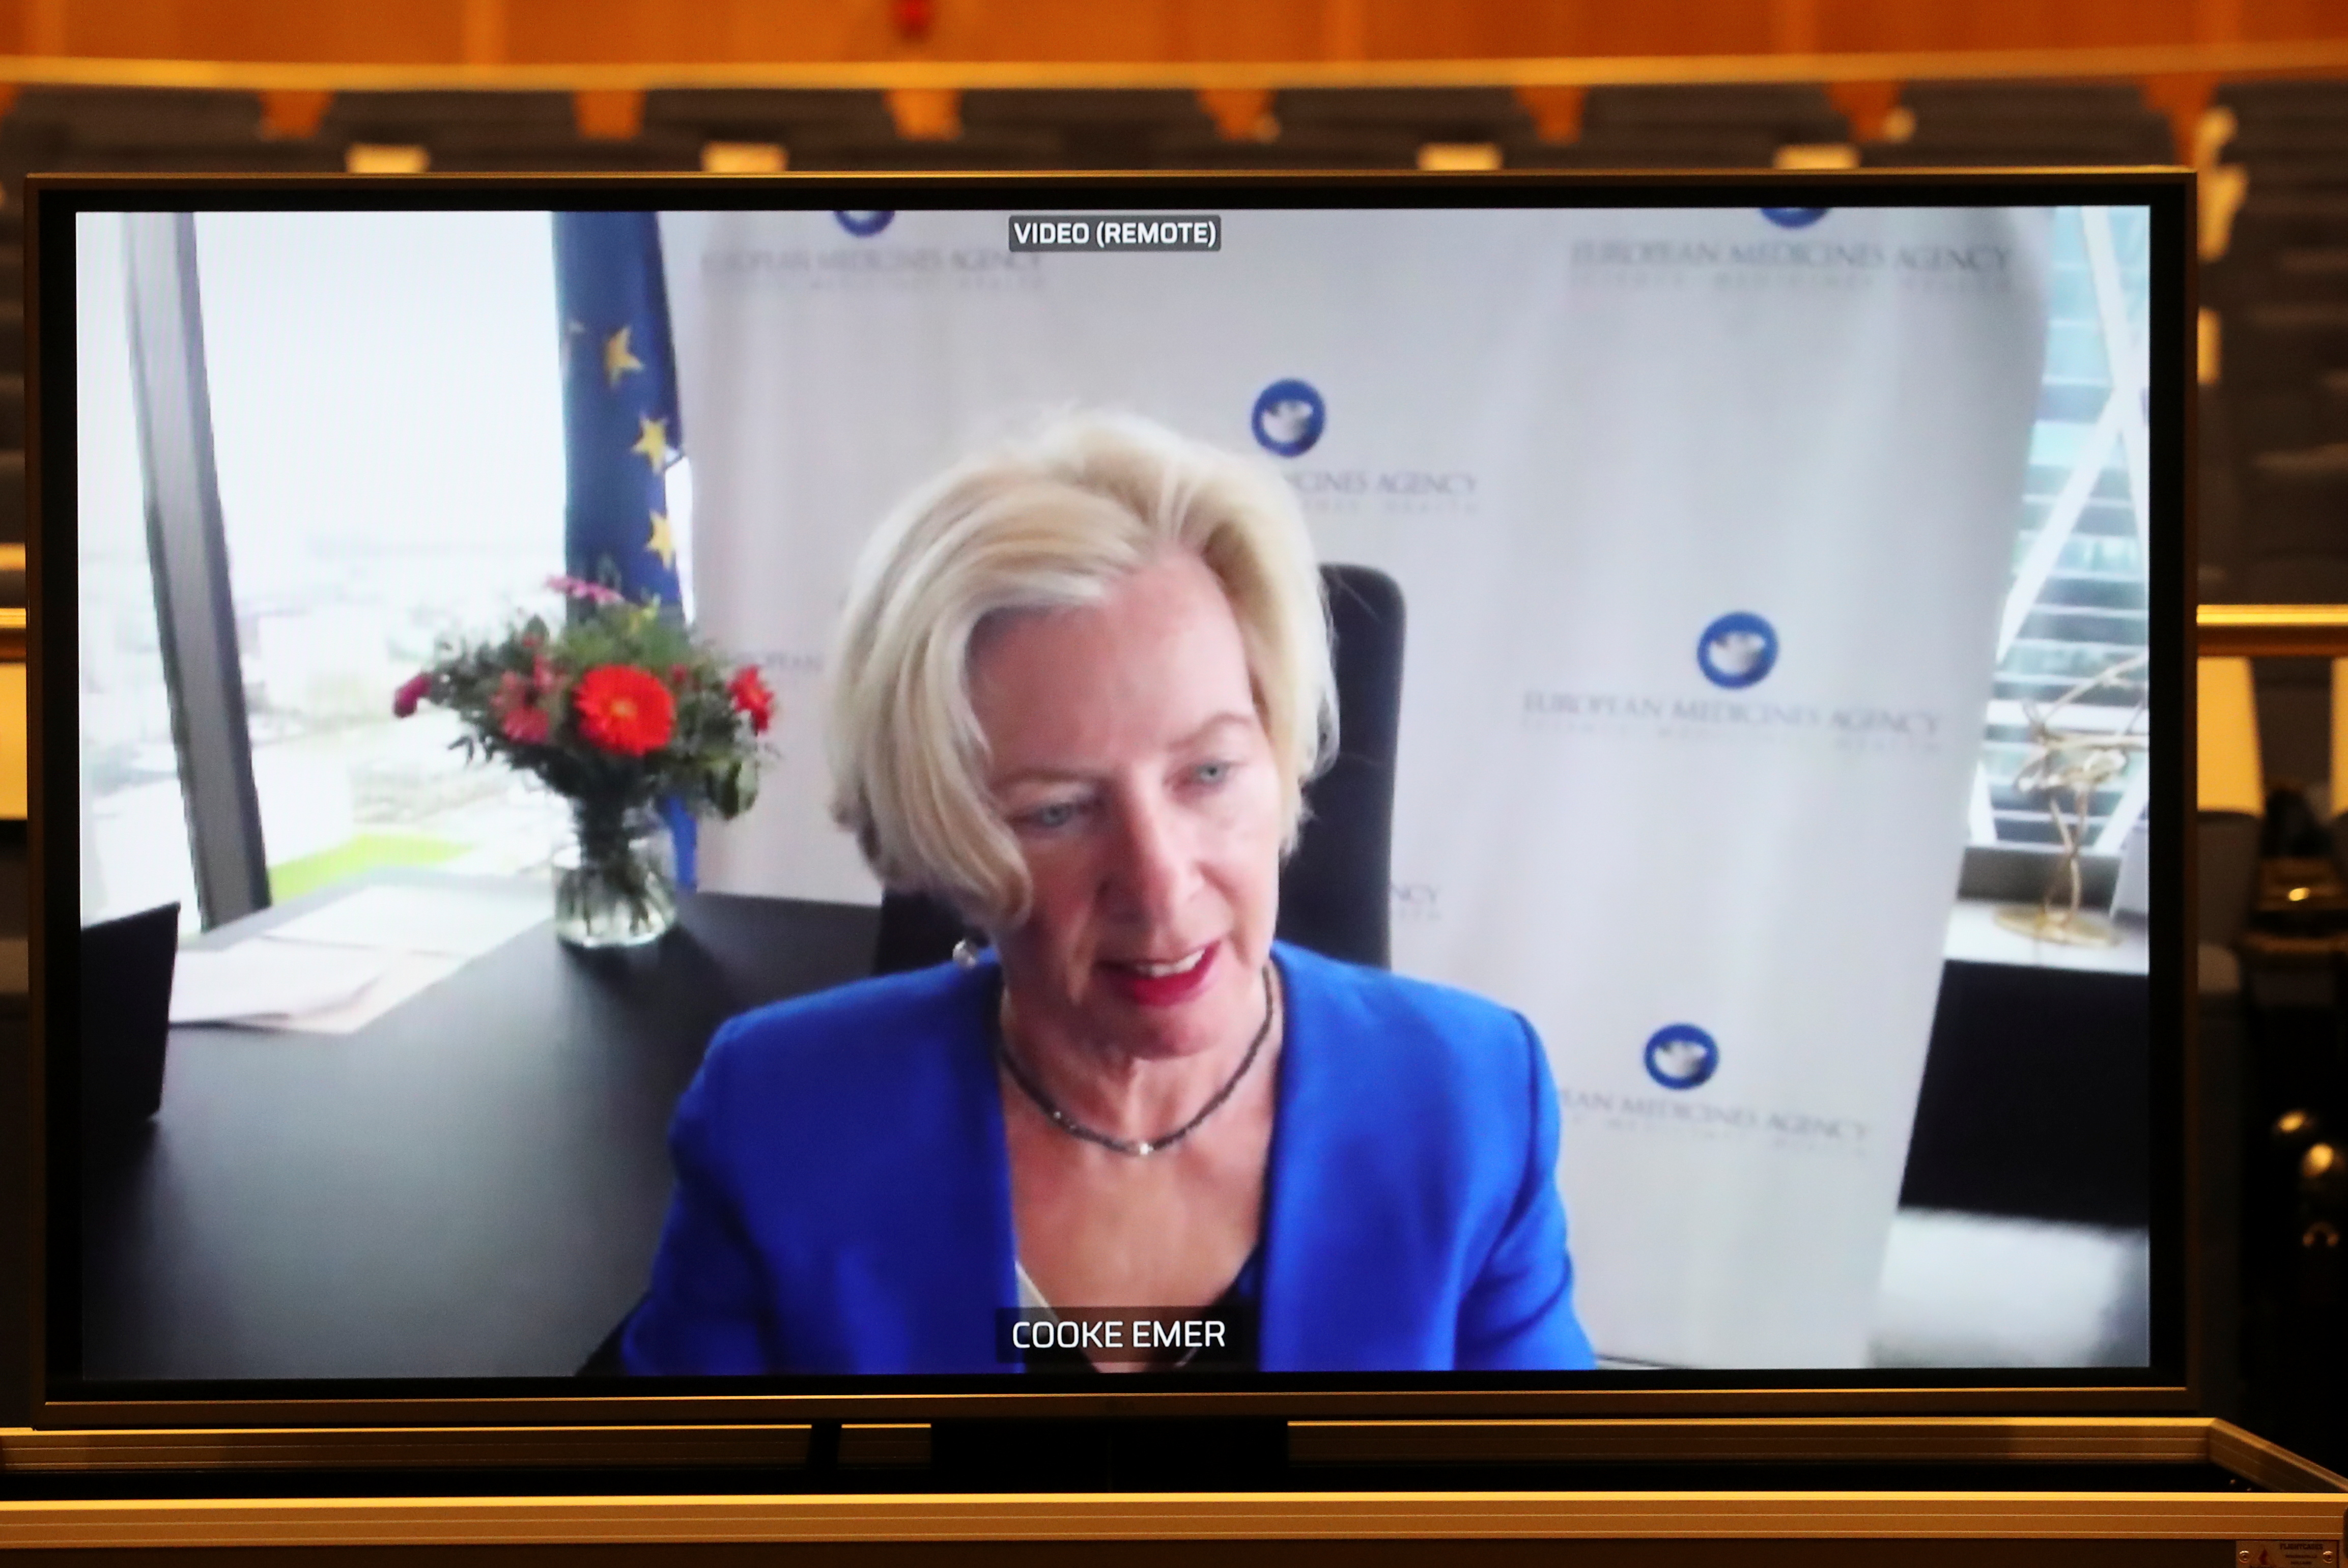 European Medicines Agency Executive Director, Emer Cooke, appears on screen during a videoconference in Brussels, Belgium March 16, 2021. REUTERS/Yves Herman/Pool/file photo